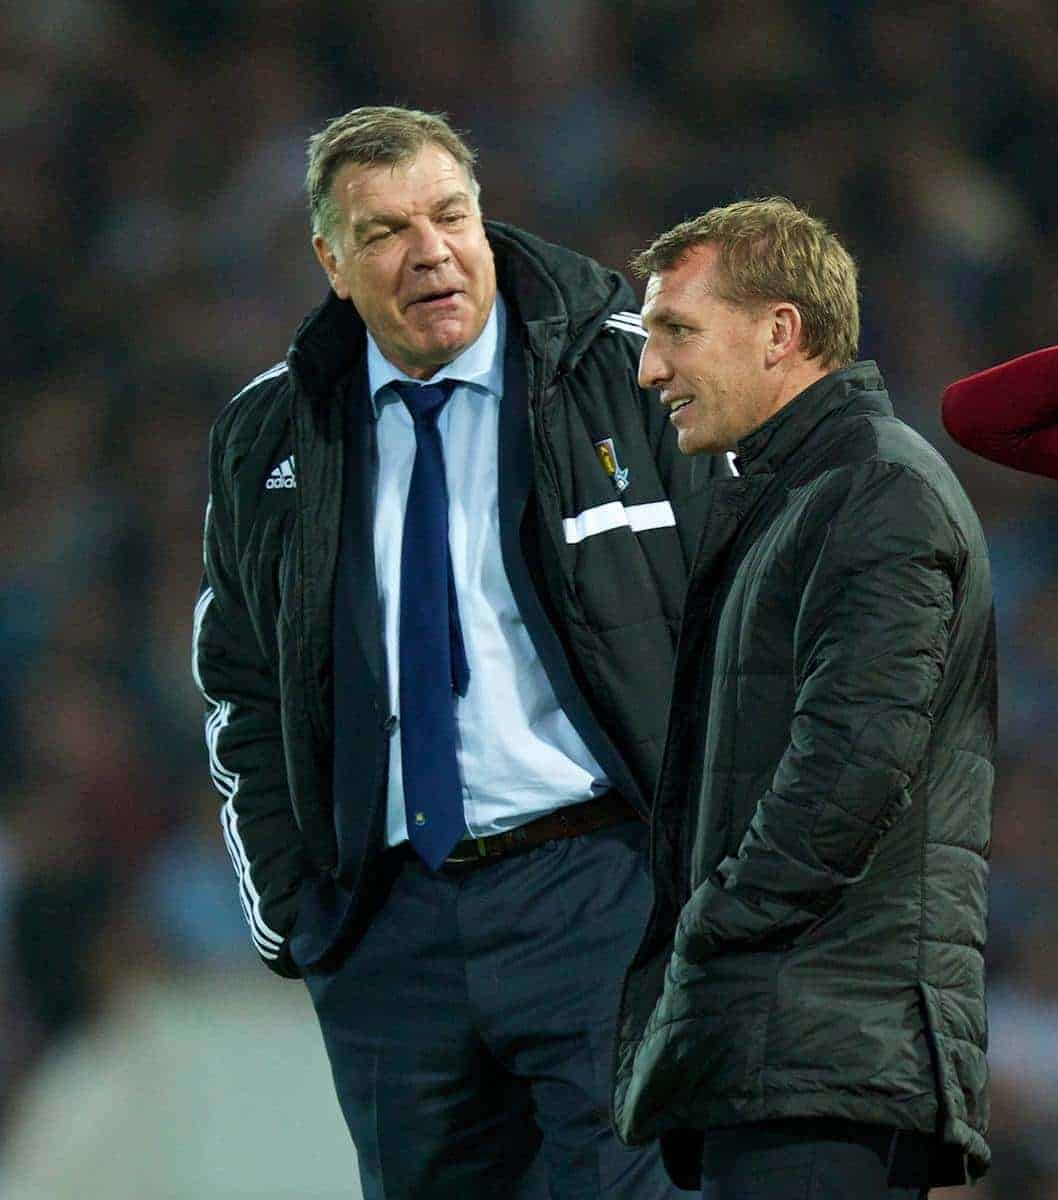 LONDON, ENGLAND - Saturday, September 20, 2014: Liverpool's manager Brendan Rodgers and West Ham United's manager Sam Allardyce during the Premier League match at Upton Park. (Pic by David Rawcliffe/Propaganda)